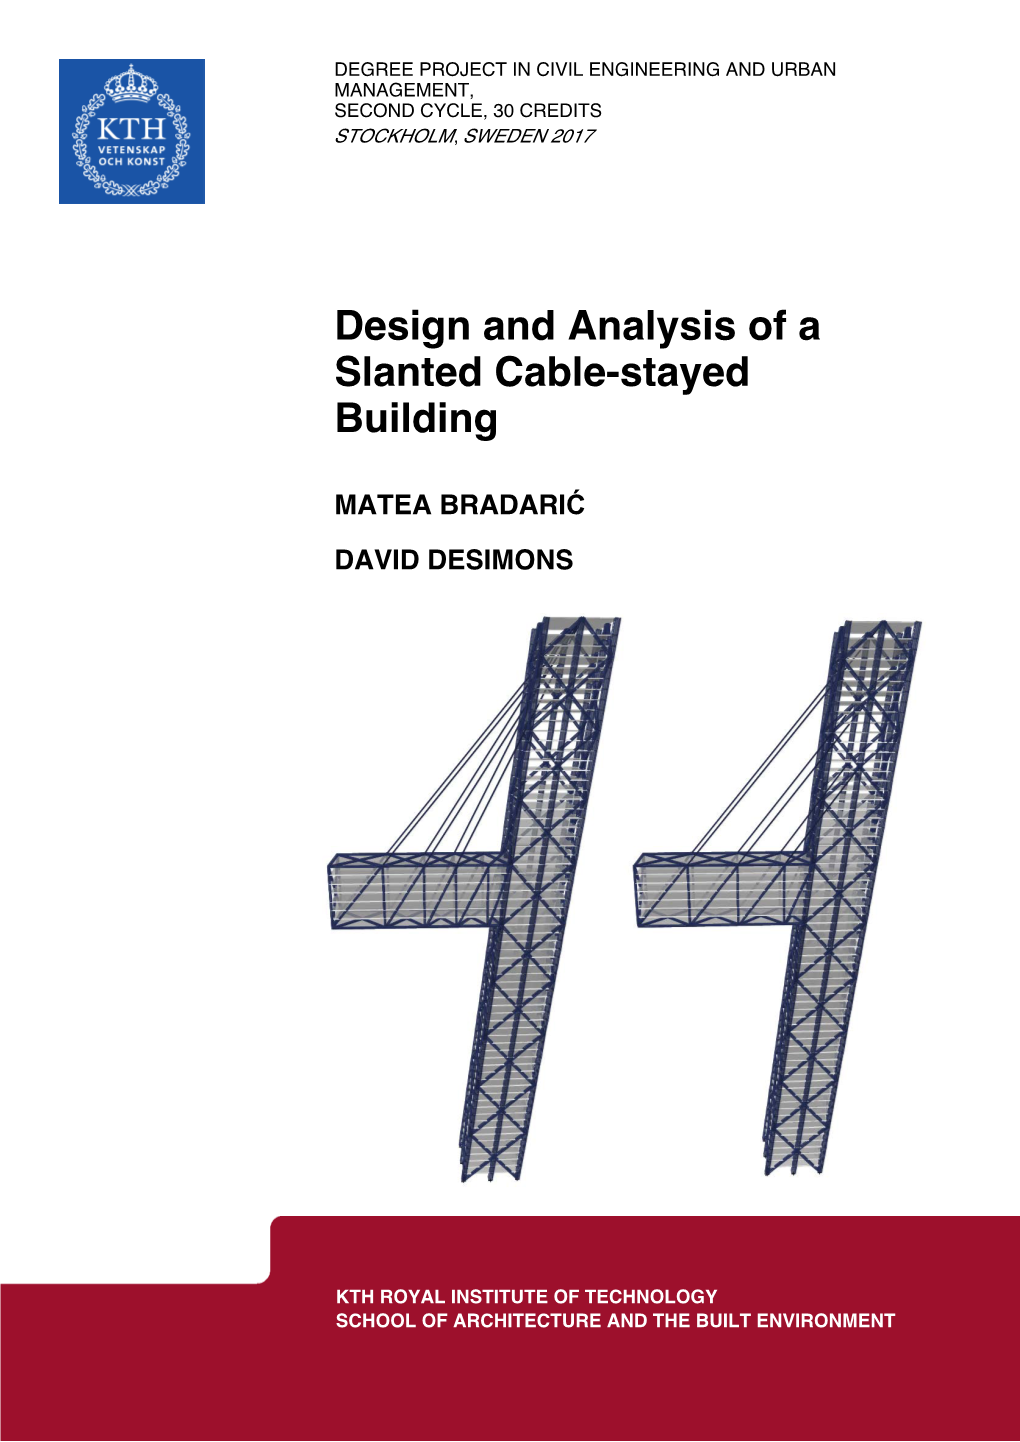 Design and Analysis of a Slanted Cable-Stayed Building